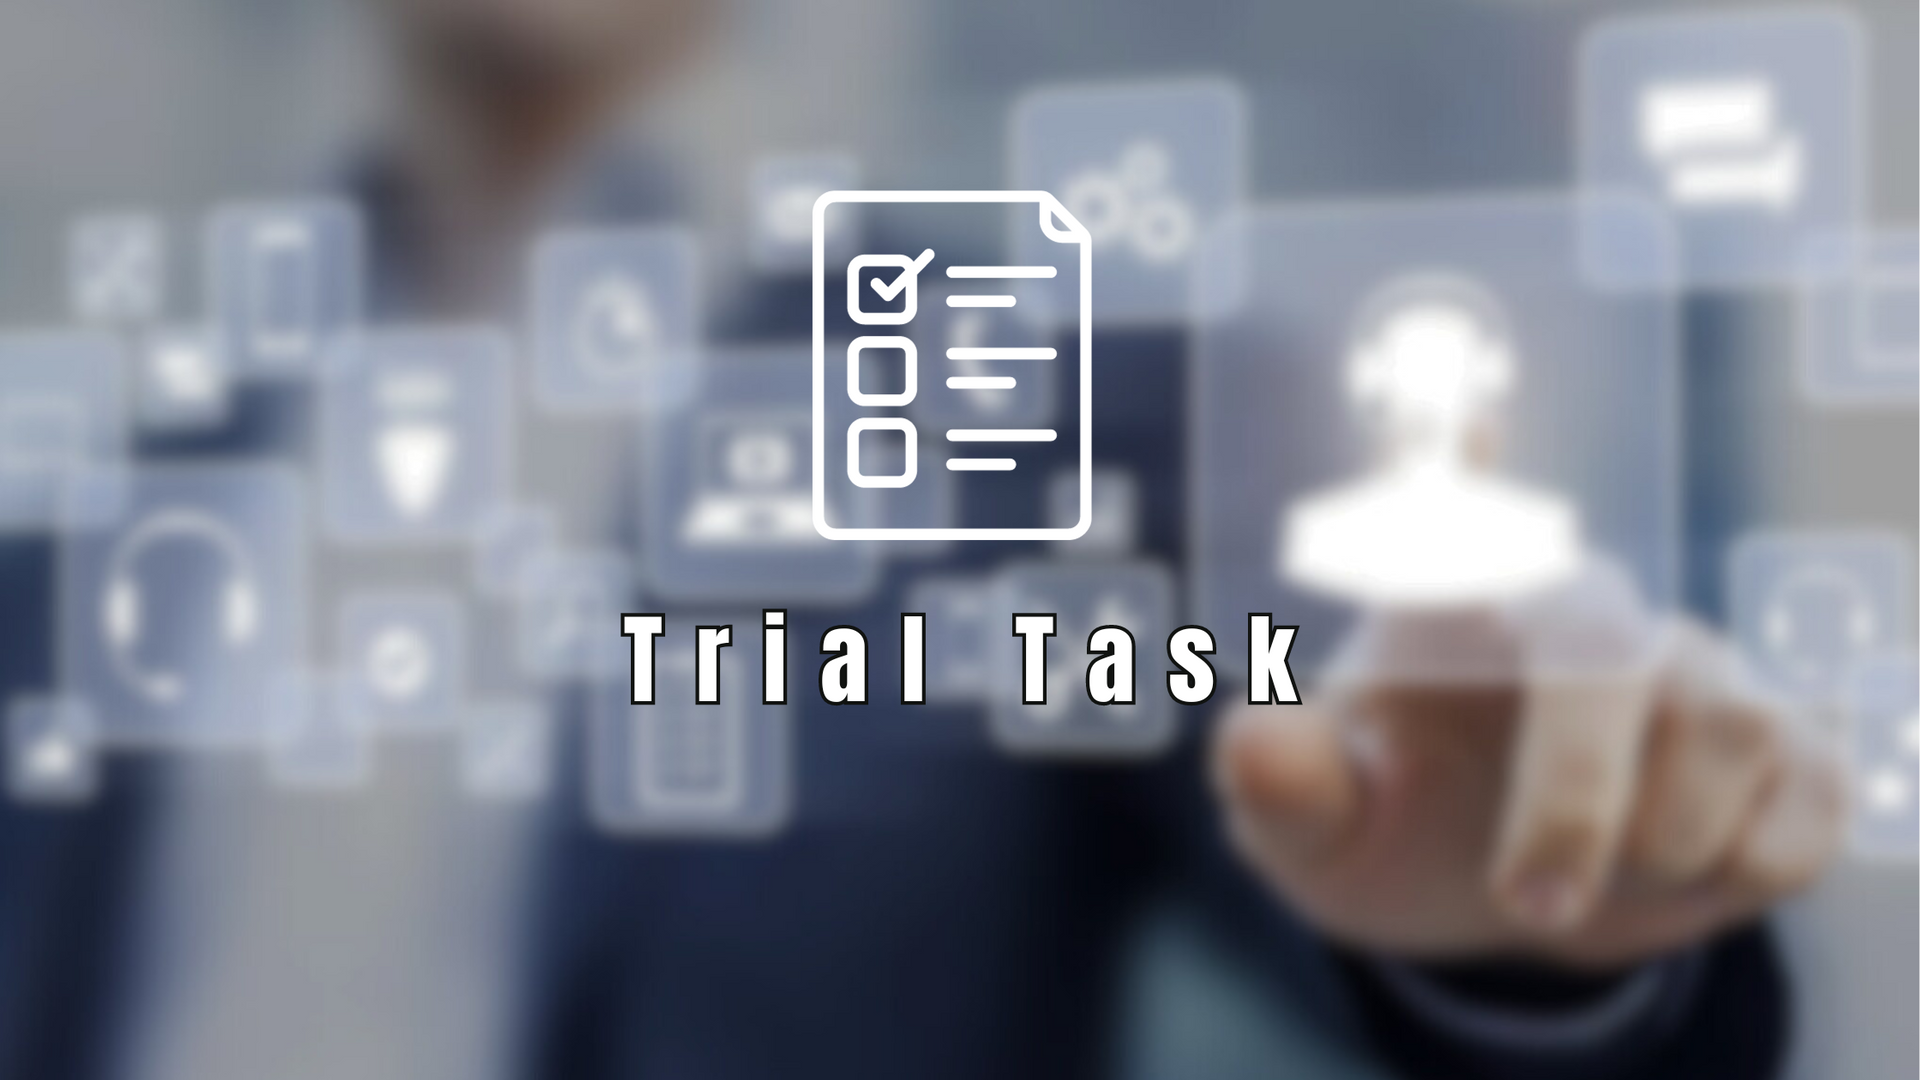 Step 4: Initiating the Work with a Trial Task